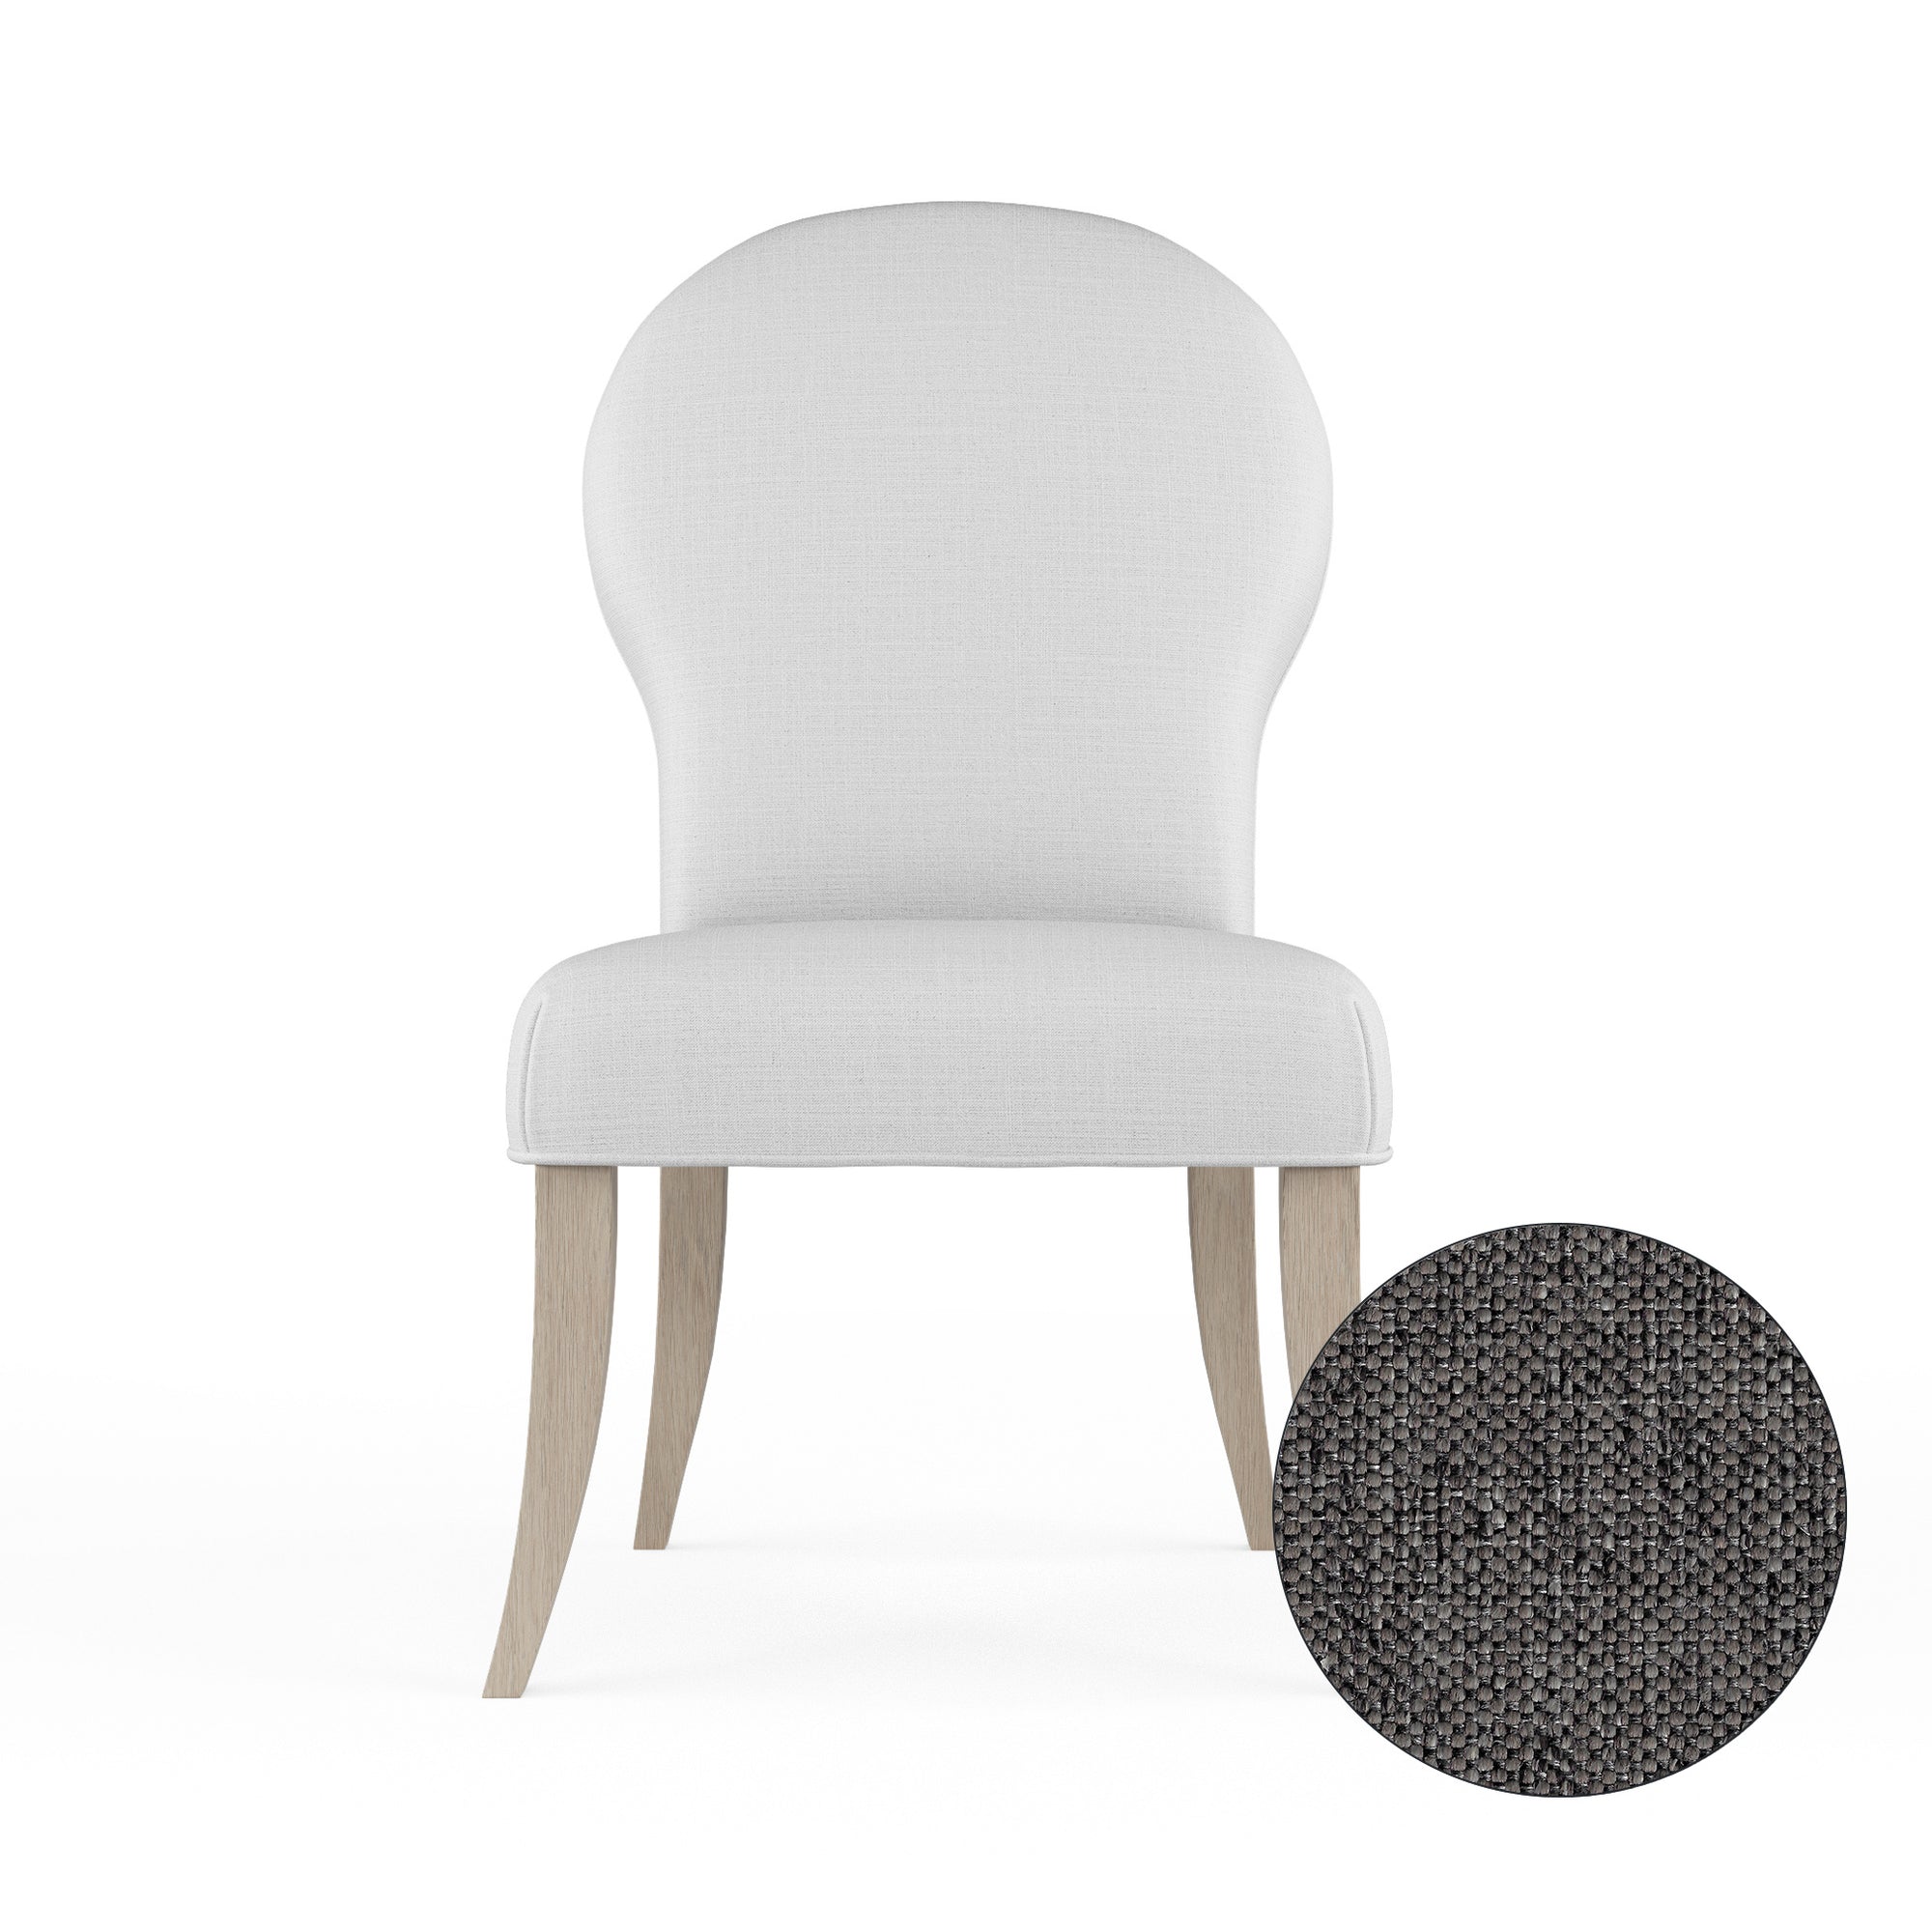 Caitlyn Dining Chair - Graphite Pebble Weave Linen